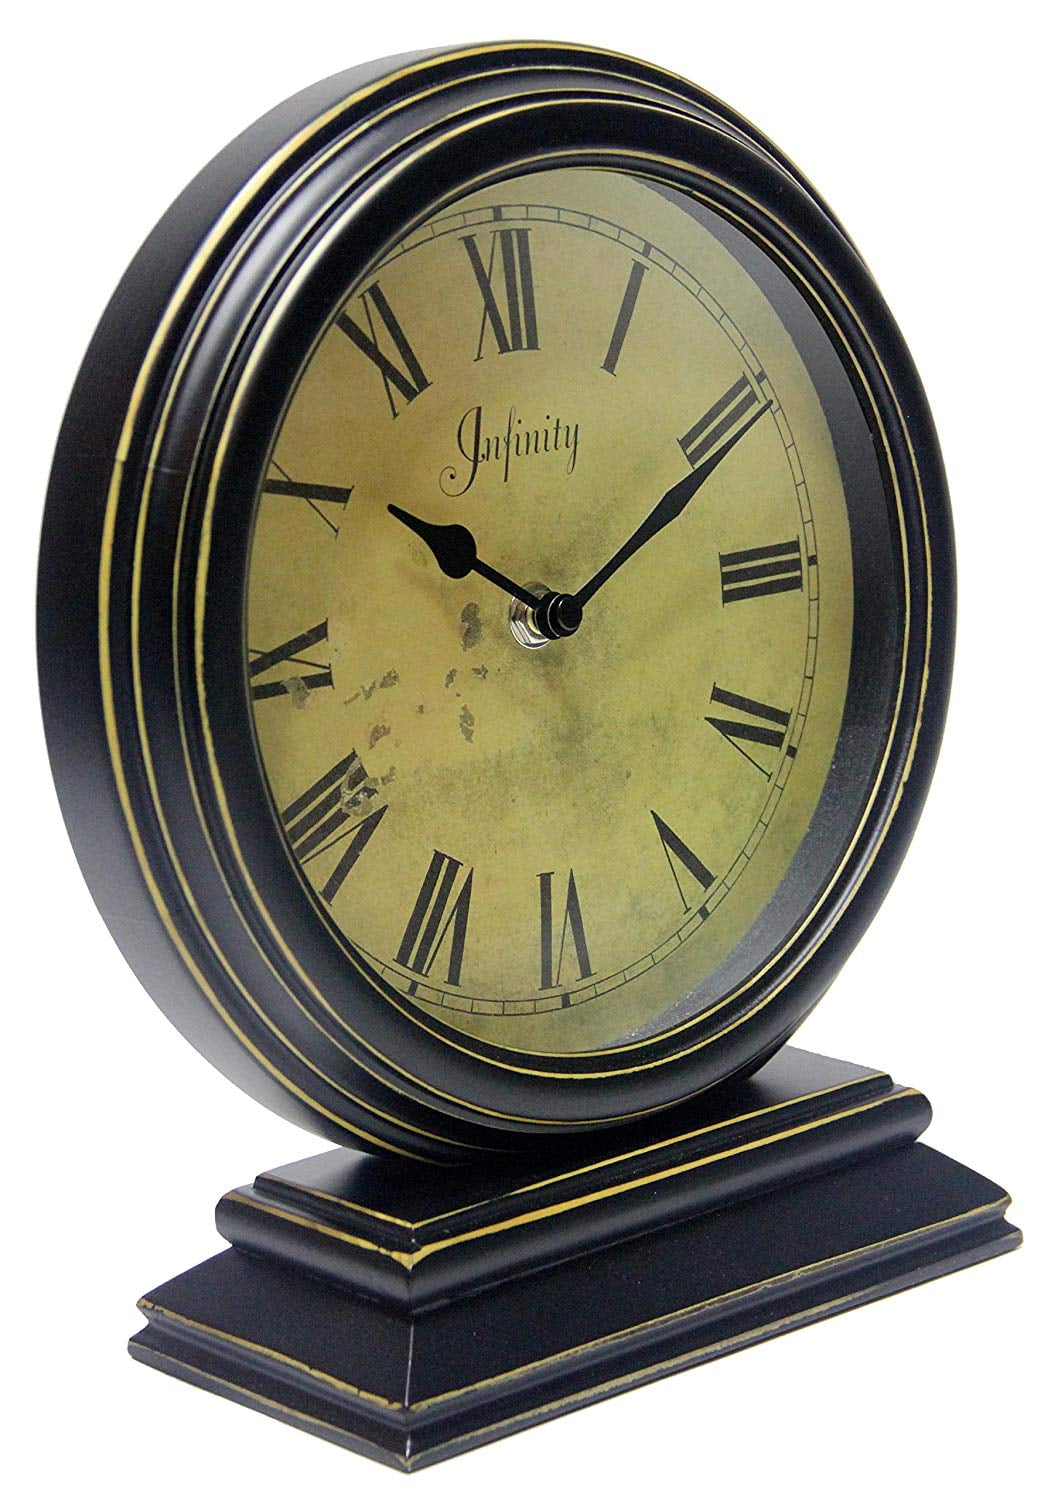 Infinity Instruments The The Dais Antique Table Clock with Personality and Style